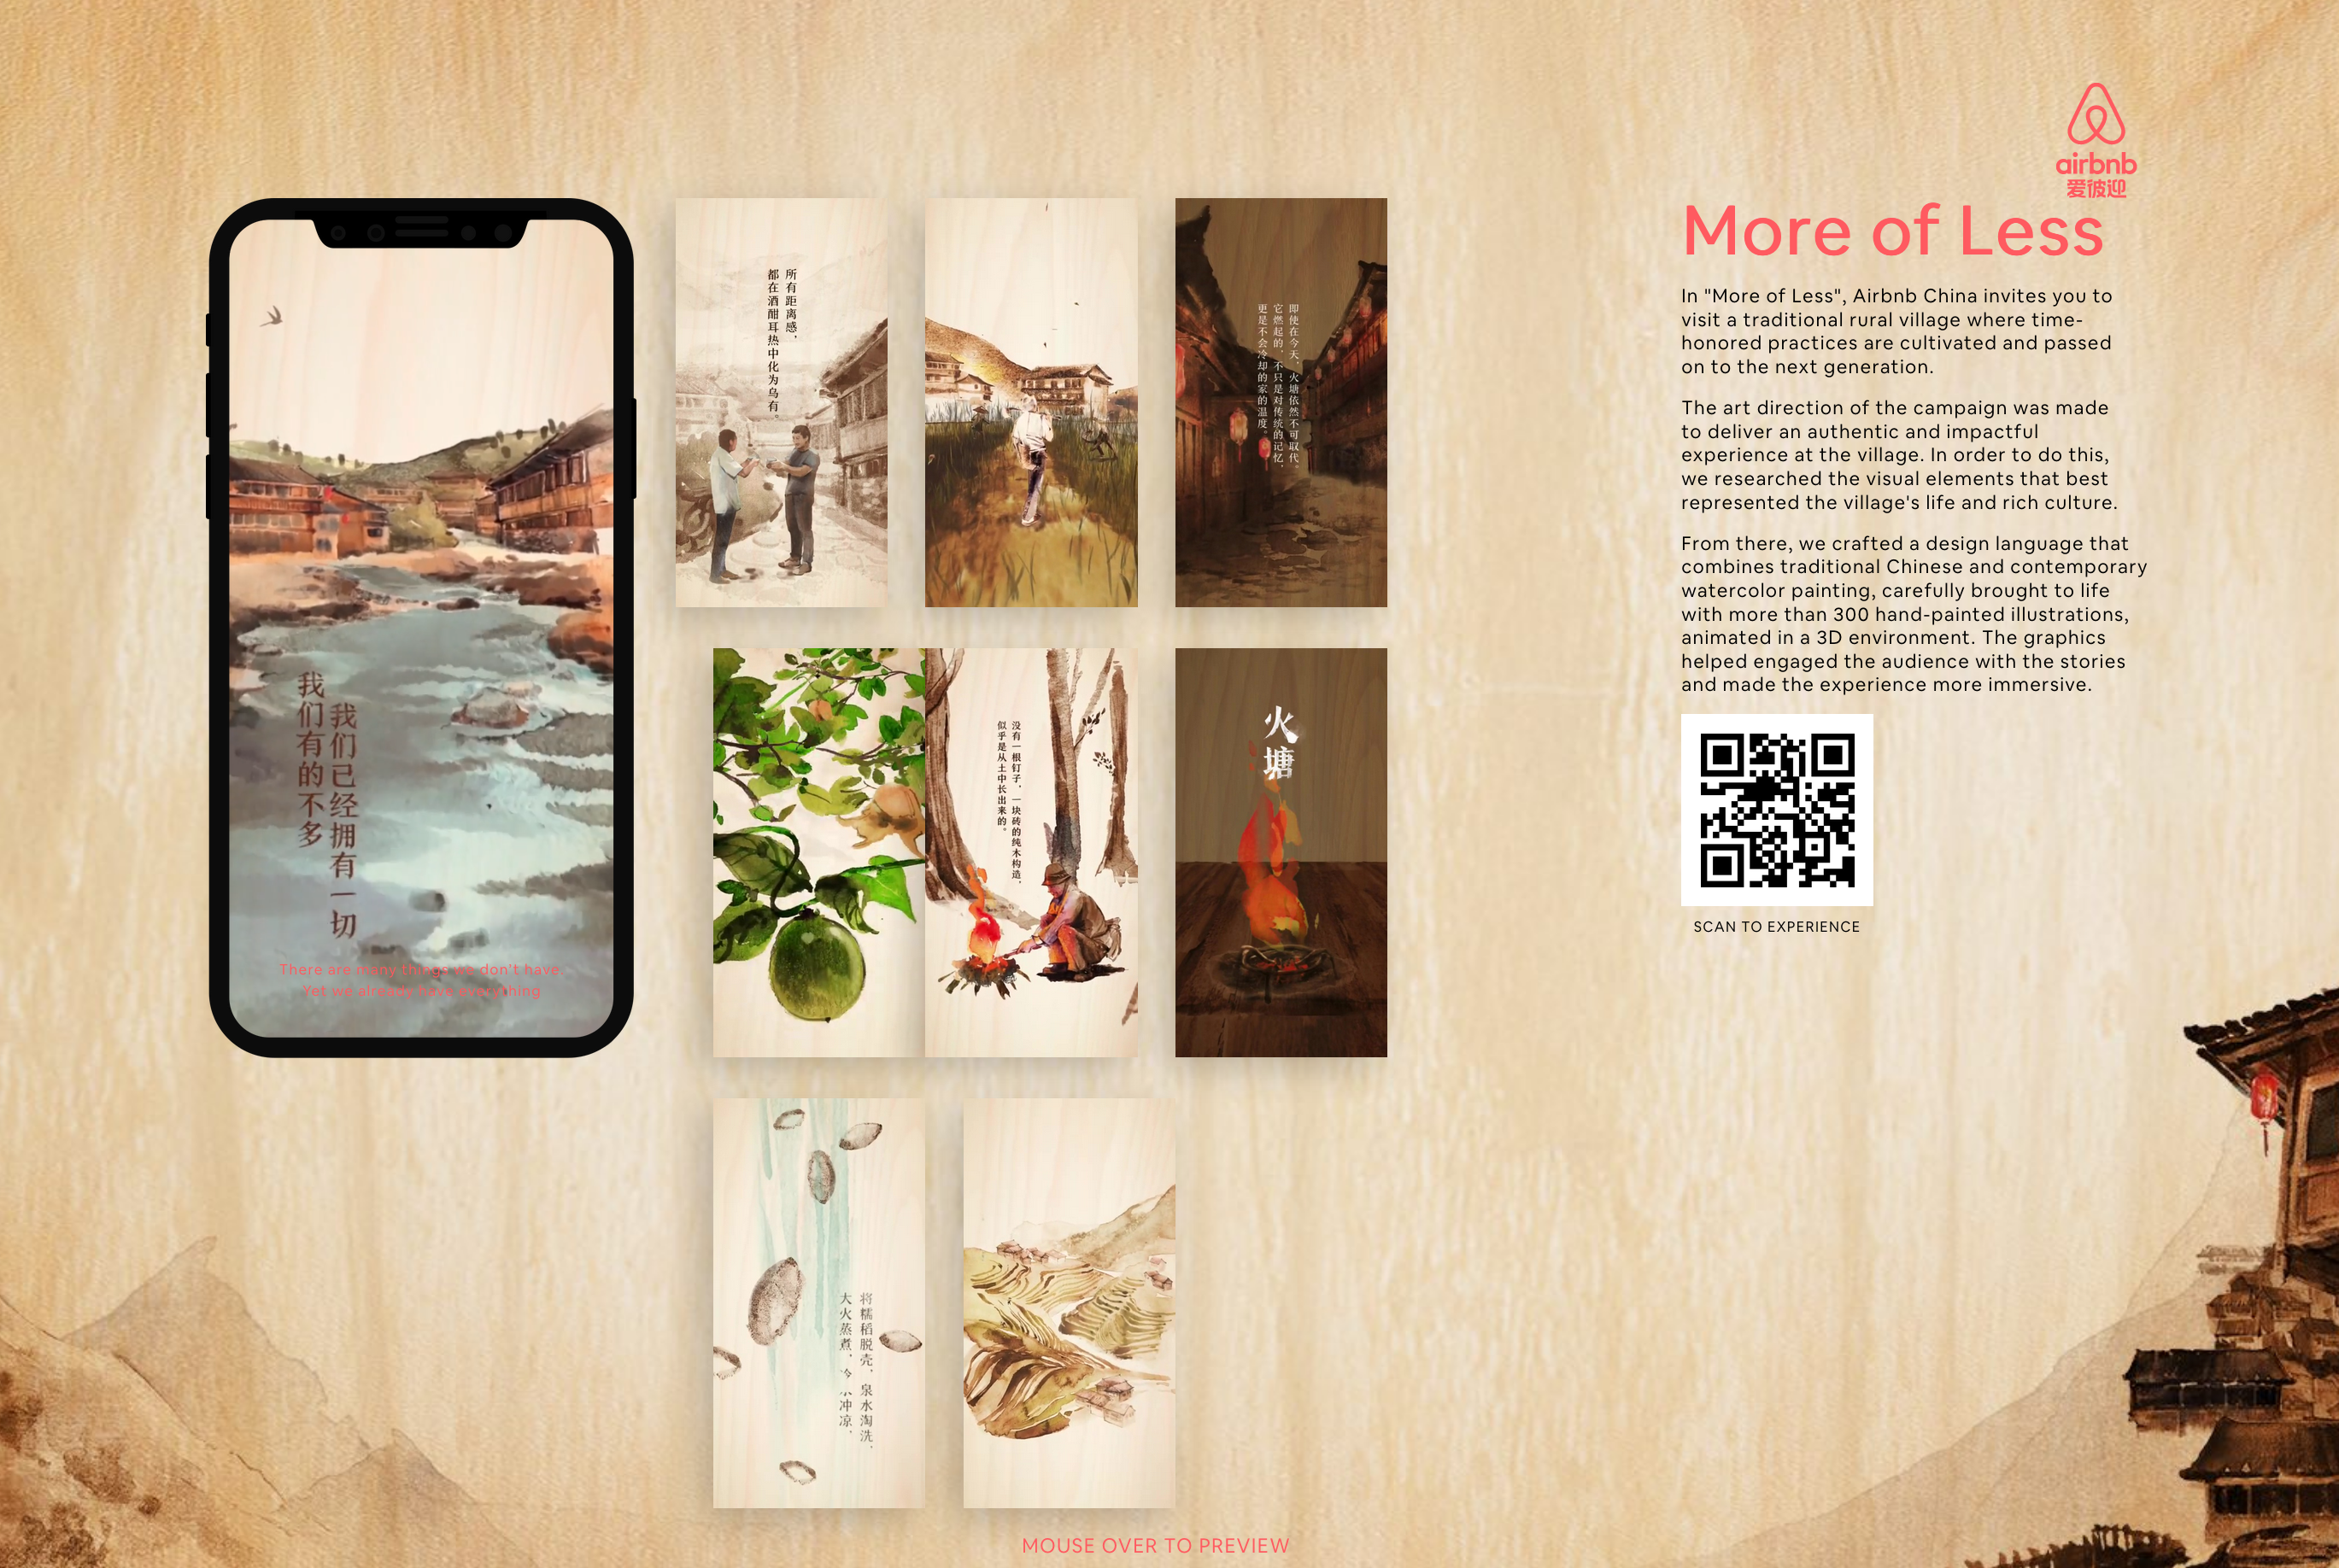 The More of Less campaign for AirBNB China brings Chinese watercolor into the digital world